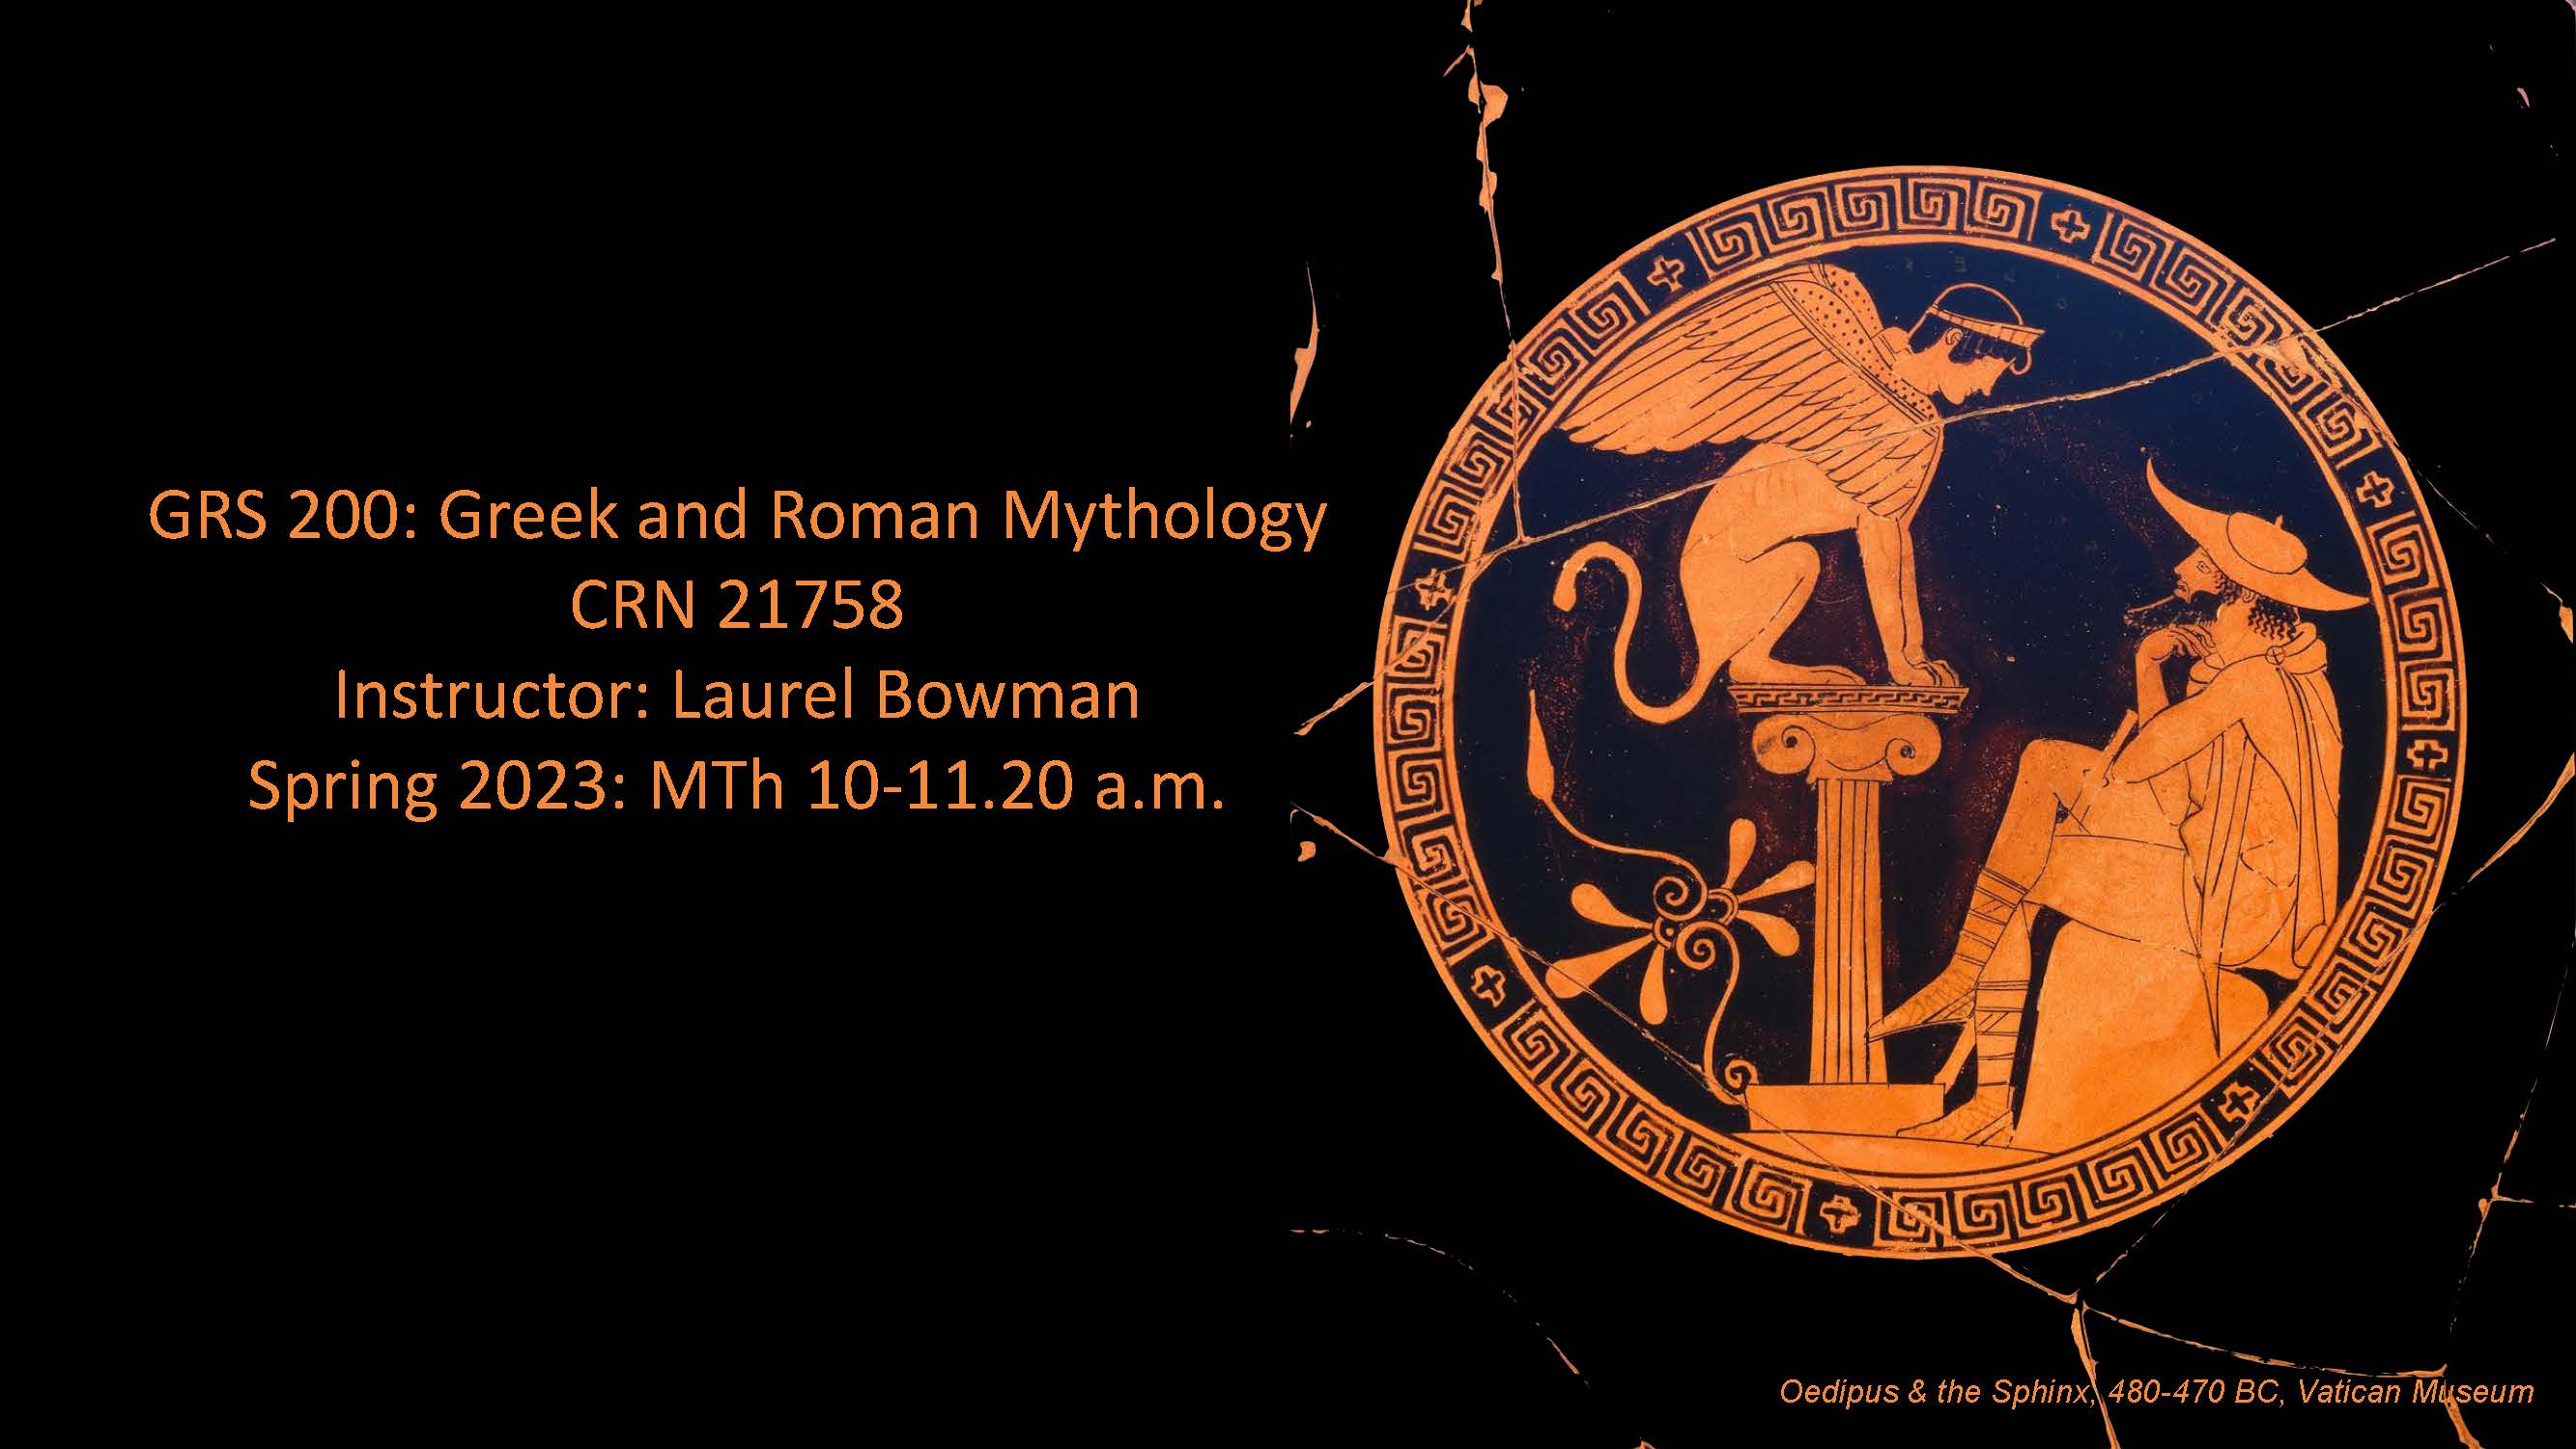 LEARN, EXAMINE, DISCOVER historical, social and cultural contexts of mythology